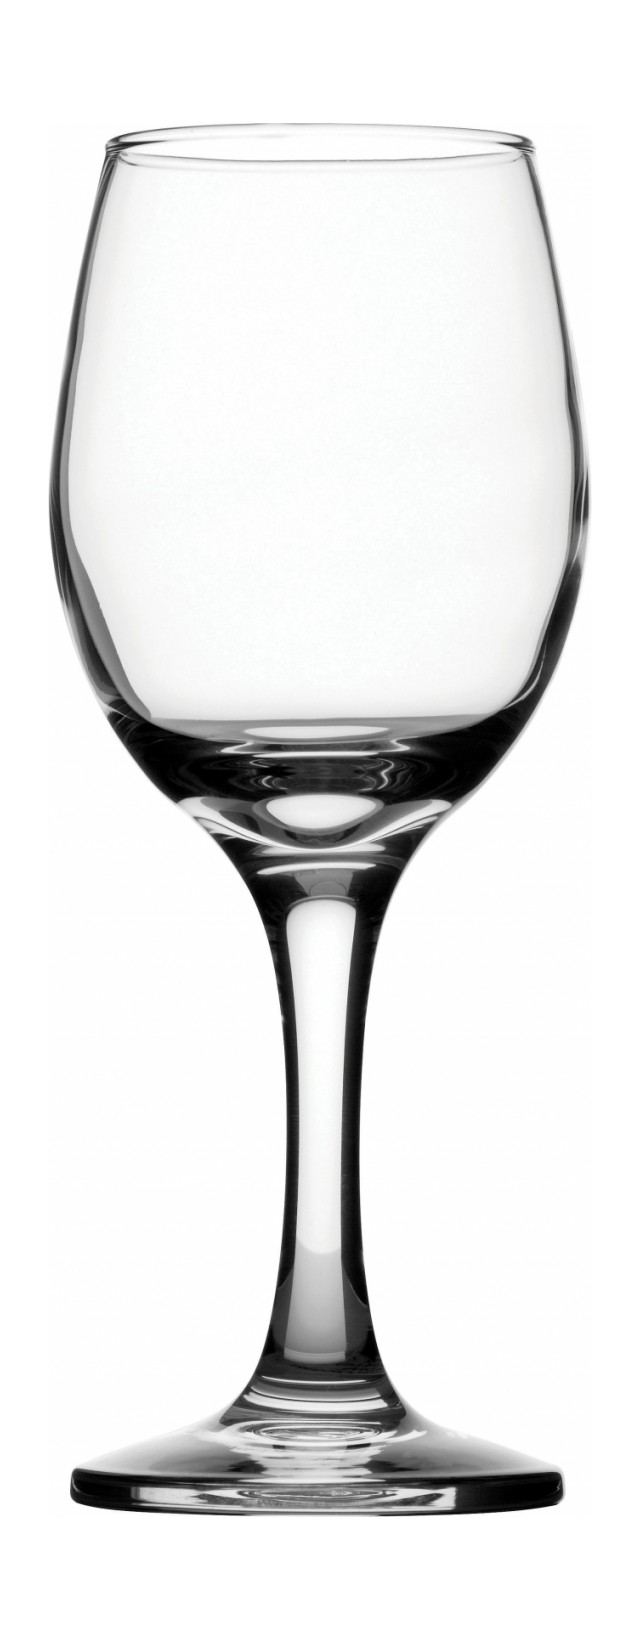 wine glass clip art pictures - photo #47